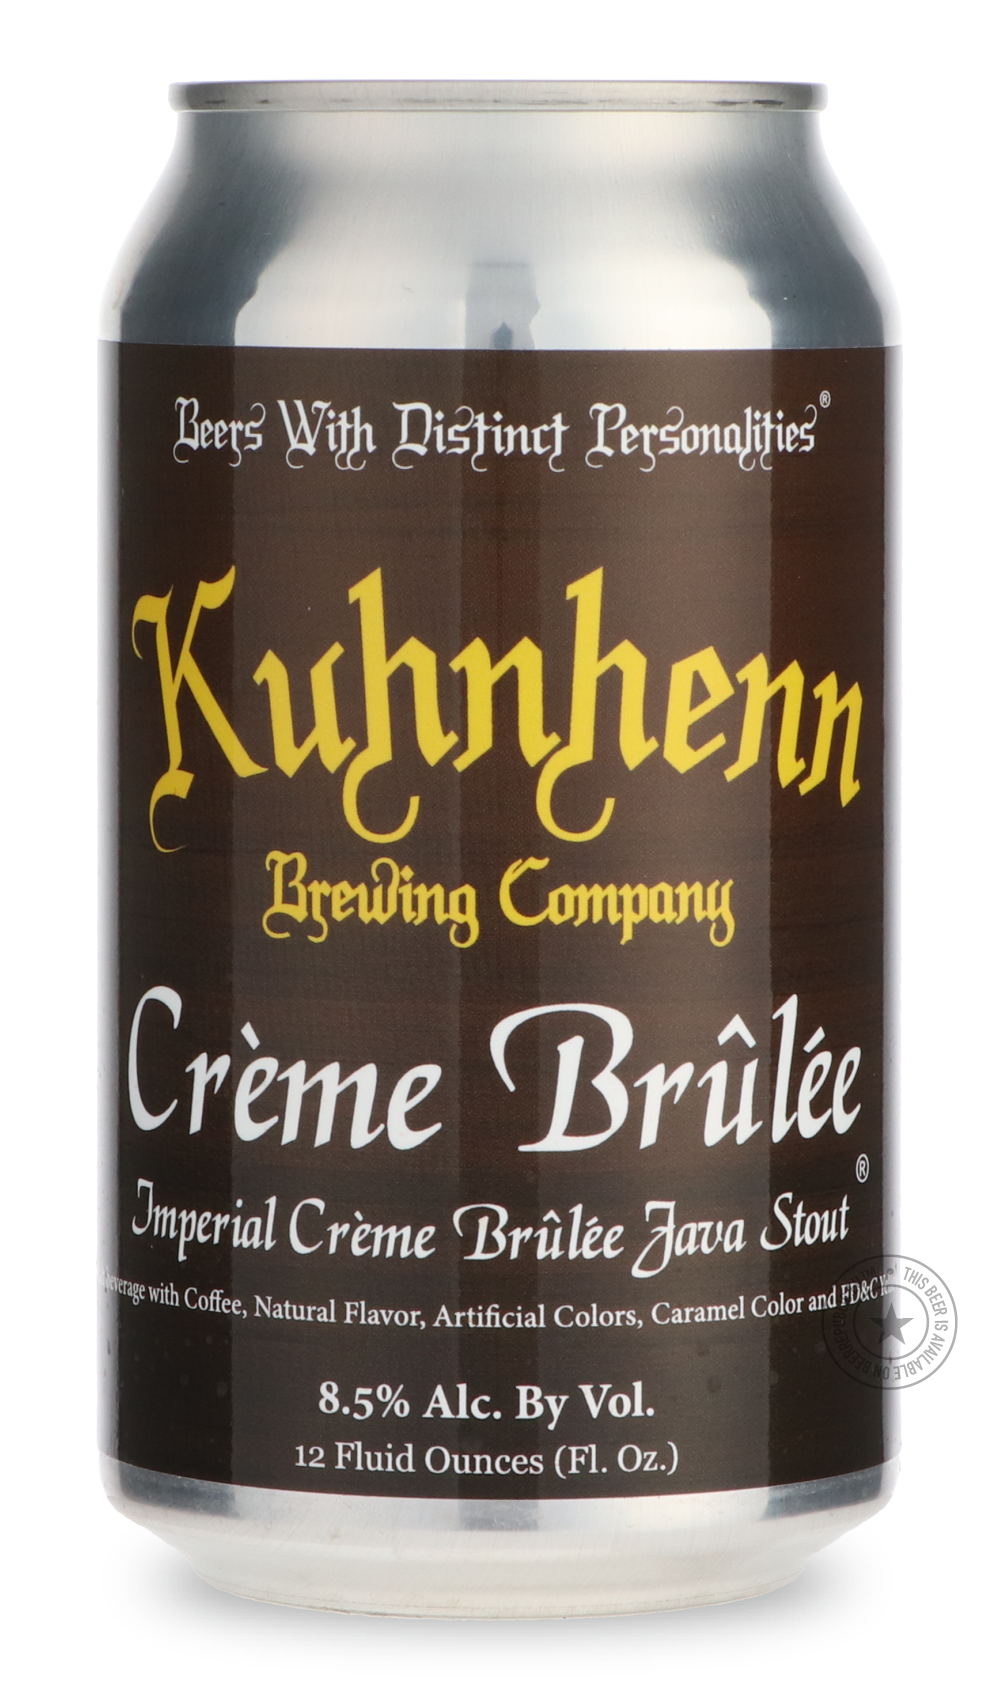 -Kuhnhenn- Imperial Crème Brûlée Java Stout-Stout & Porter- Only @ Beer Republic - The best online beer store for American & Canadian craft beer - Buy beer online from the USA and Canada - Bier online kopen - Amerikaans bier kopen - Craft beer store - Craft beer kopen - Amerikanisch bier kaufen - Bier online kaufen - Acheter biere online - IPA - Stout - Porter - New England IPA - Hazy IPA - Imperial Stout - Barrel Aged - Barrel Aged Imperial Stout - Brown - Dark beer - Blond - Blonde - Pilsner - Lager - Whe